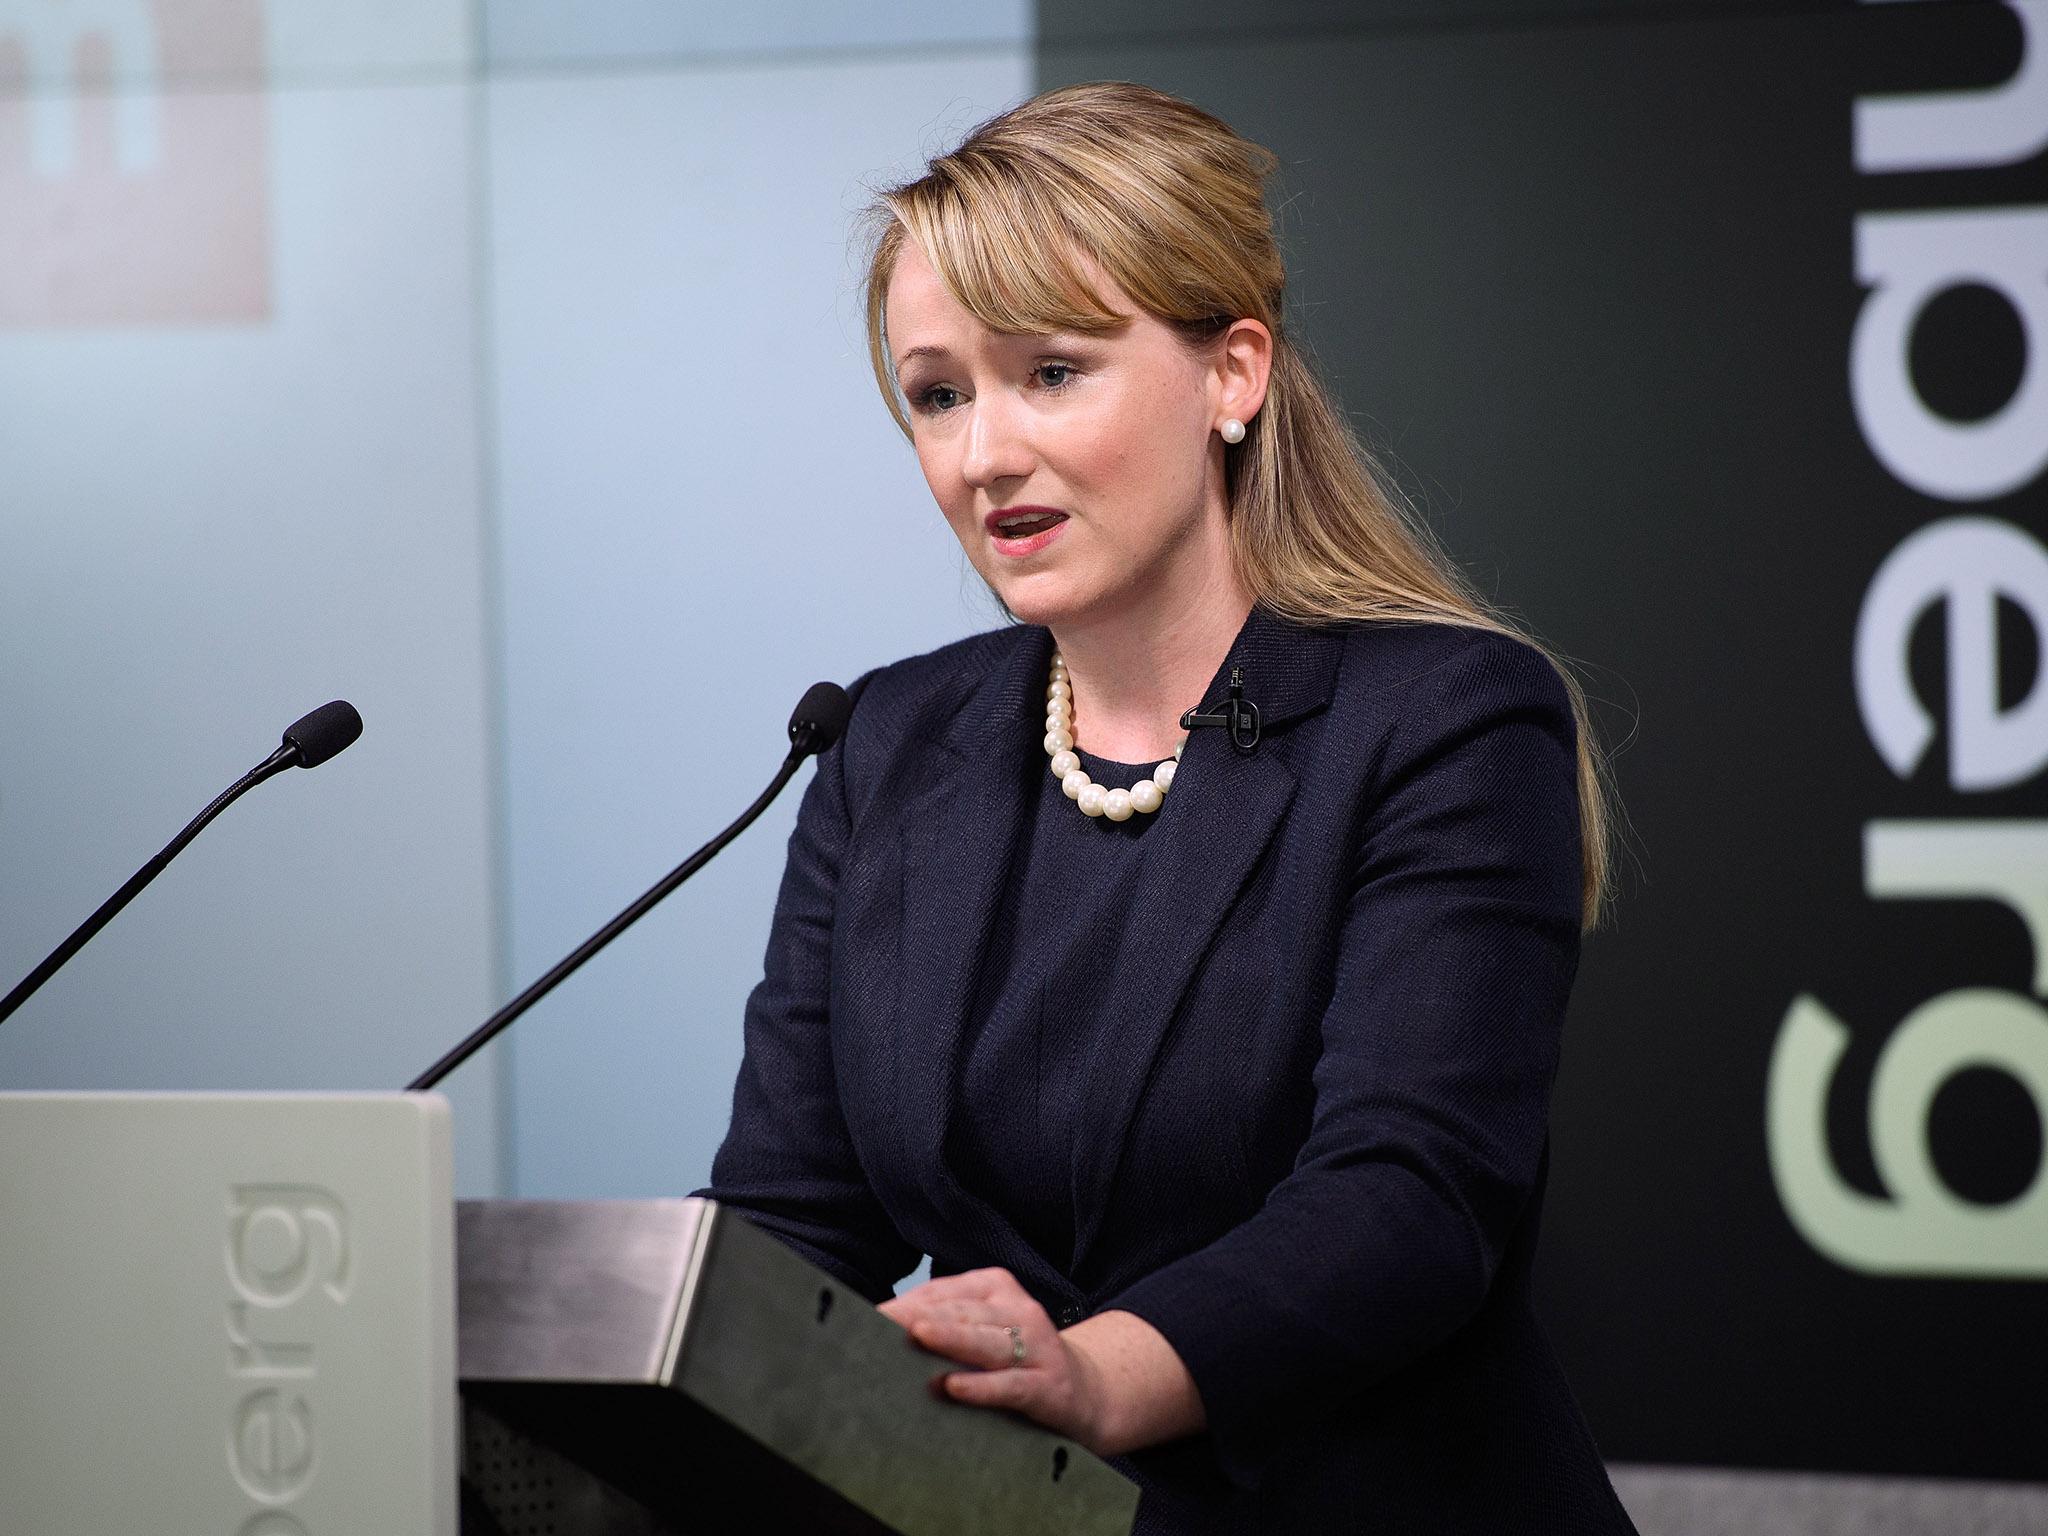 The leadership have been quick to promote Rebecca Long-Bailey. It is hard to see why.